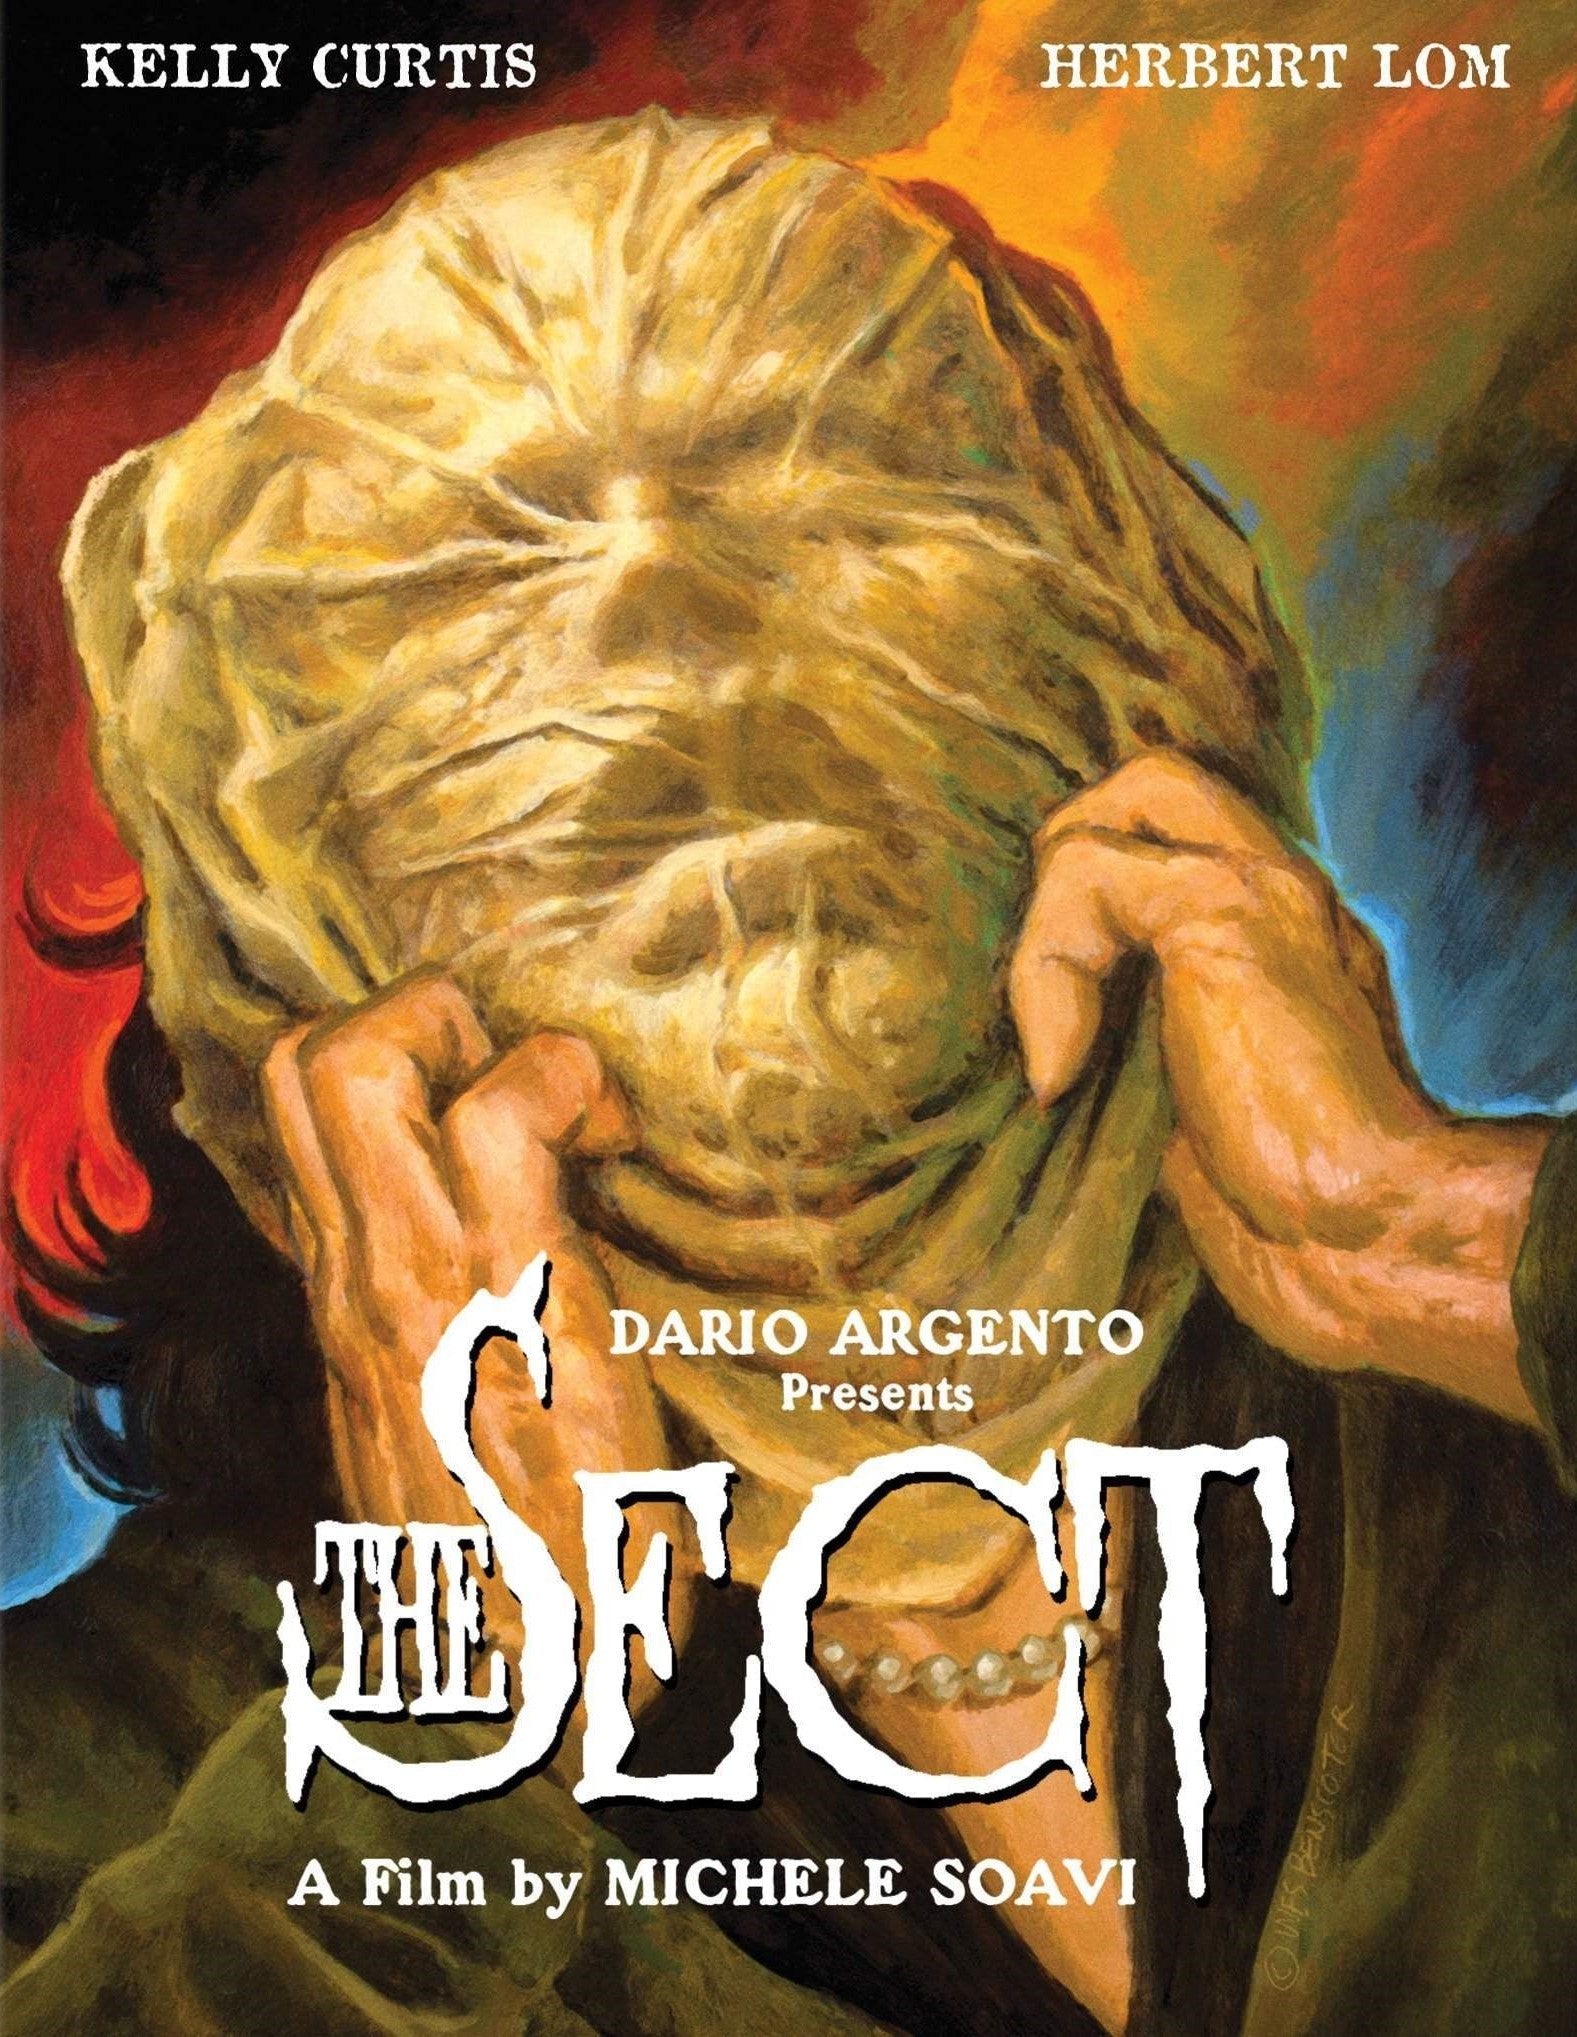 The Sect (Limited Edition) Blu-Ray Blu-Ray